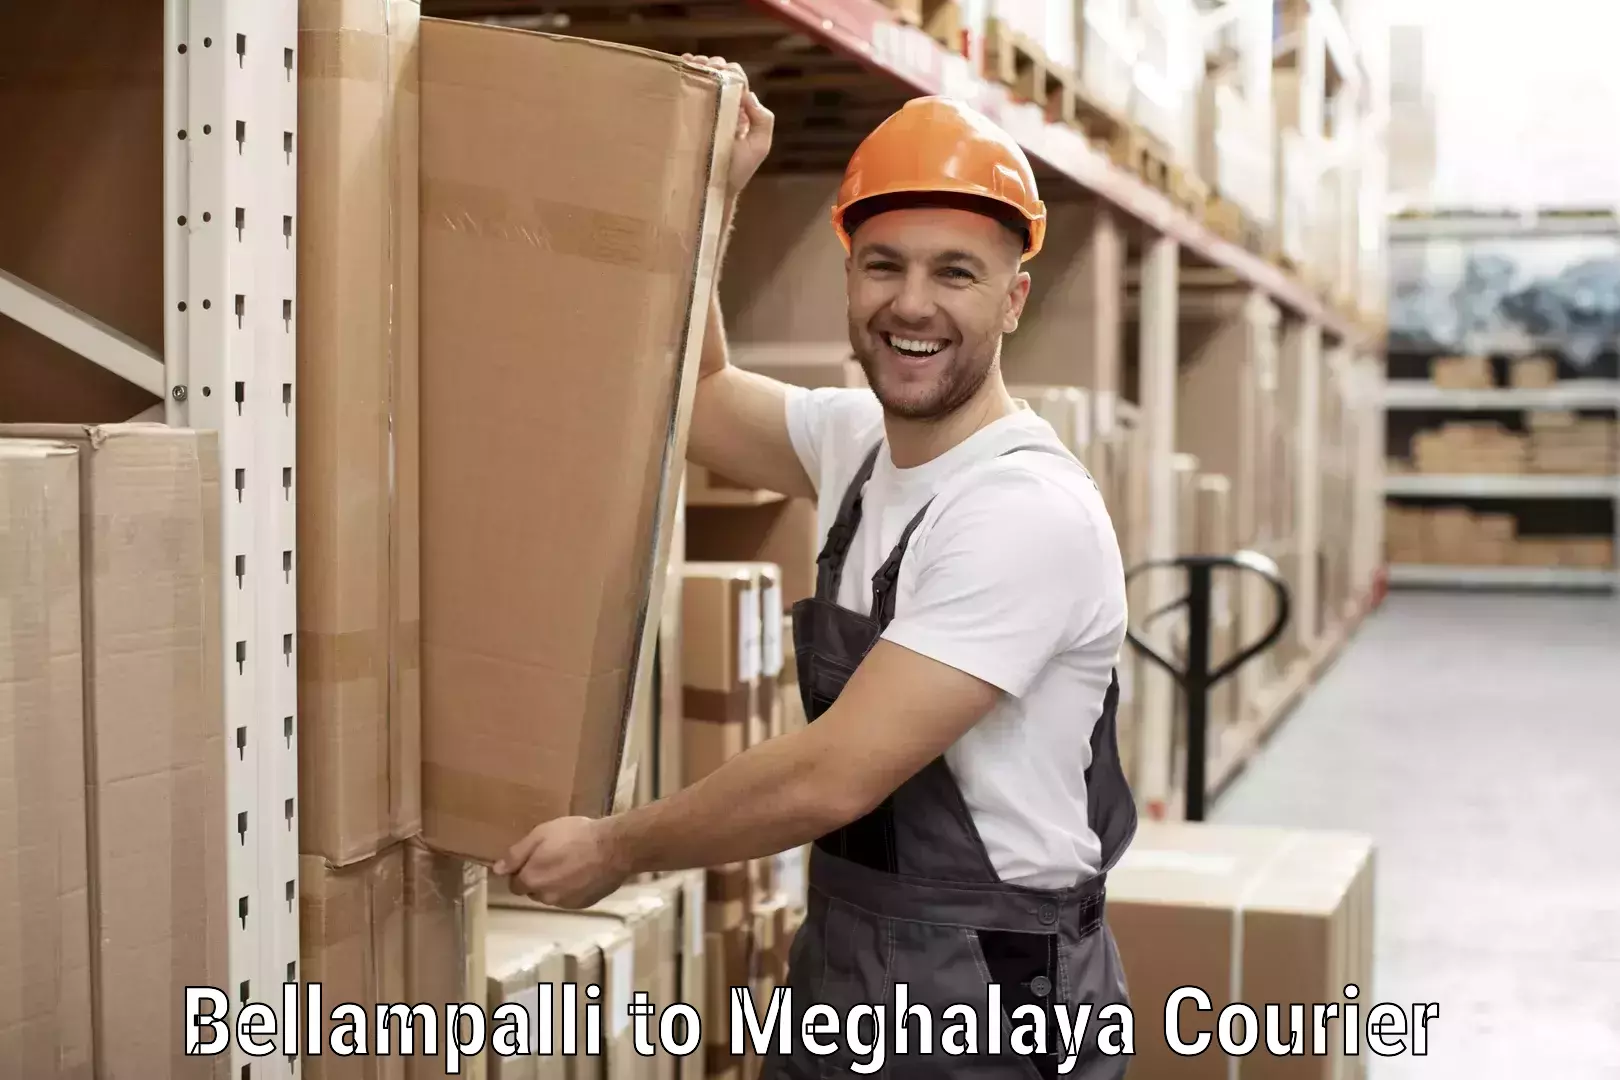 Quality courier services in Bellampalli to Shillong